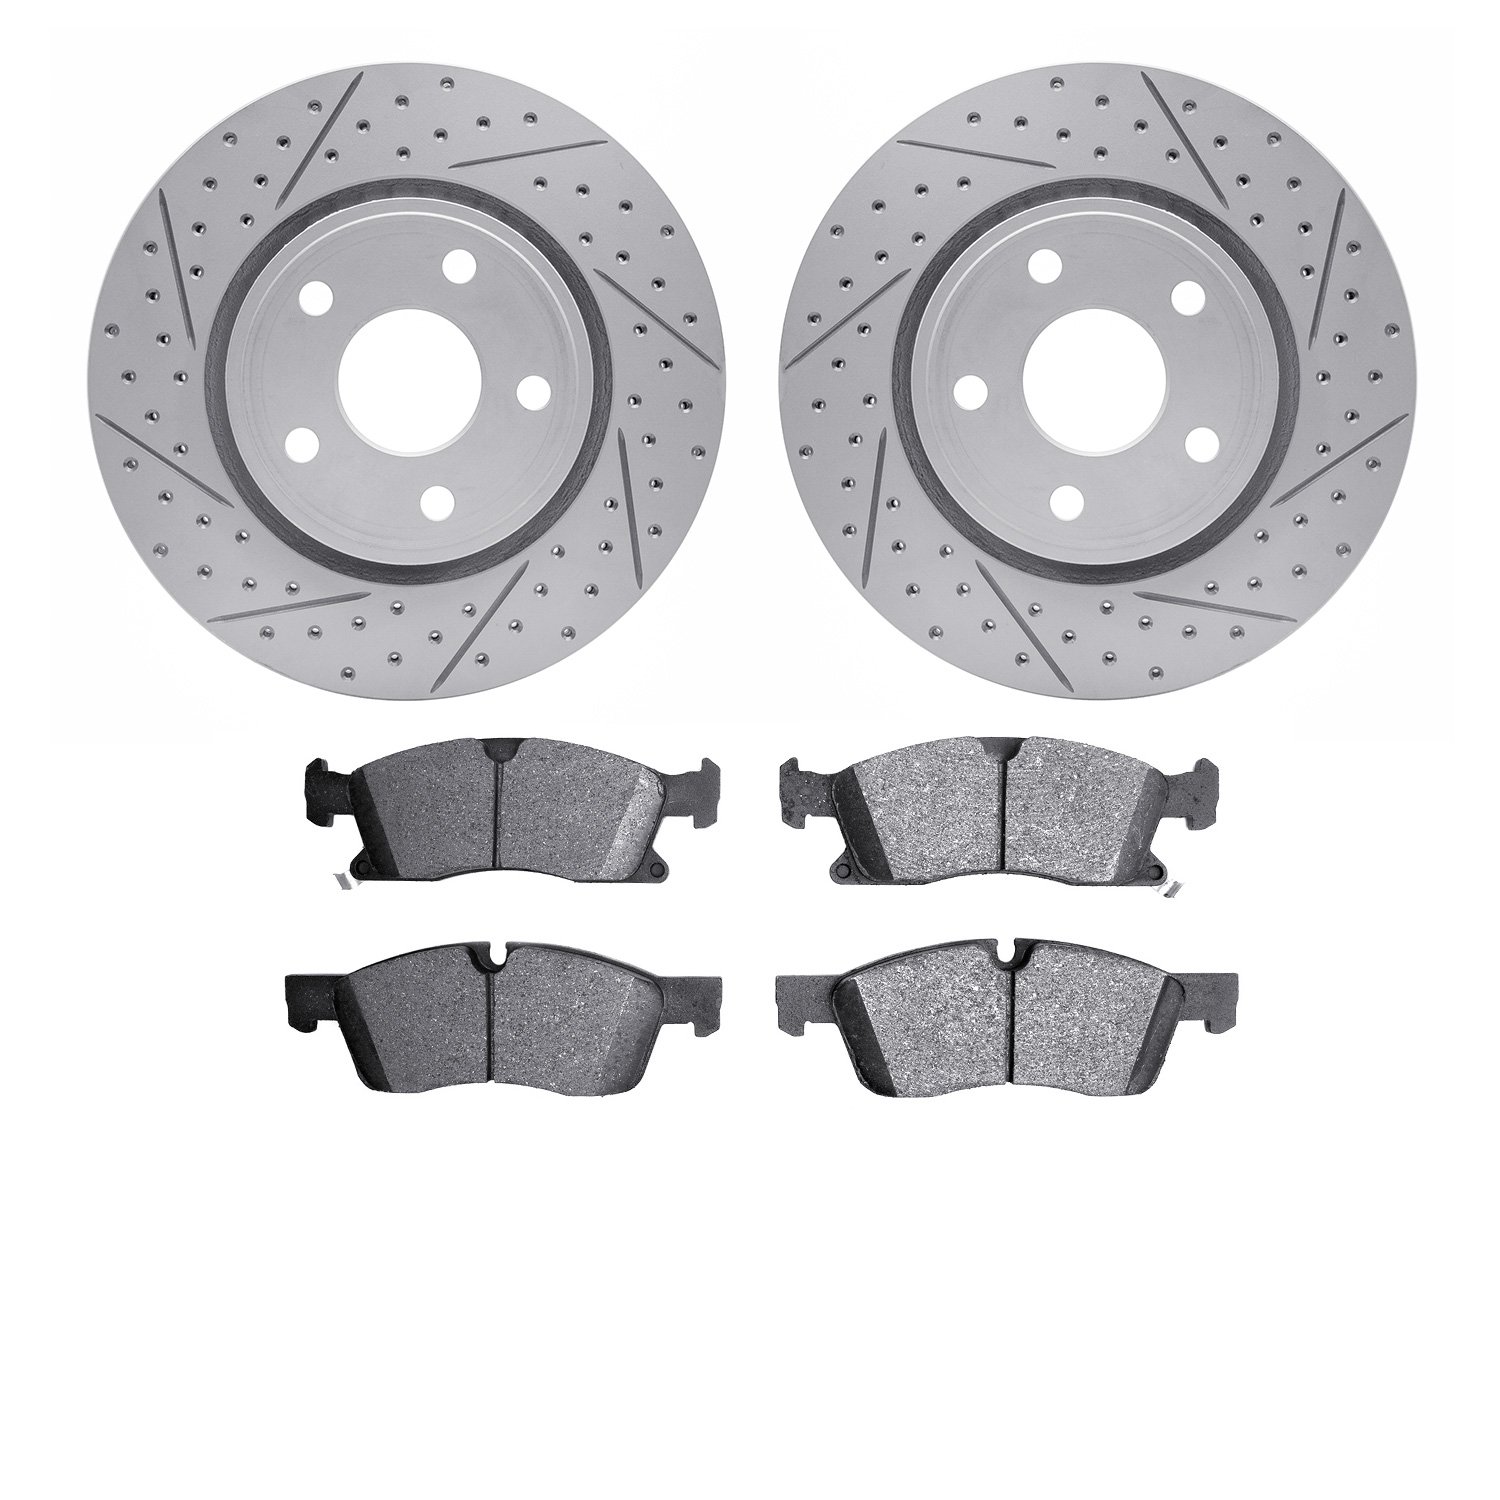 2402-42006 Geoperformance Drilled/Slotted Brake Rotors with Ultimate-Duty Brake Pads Kit, Fits Select Mopar, Position: Front